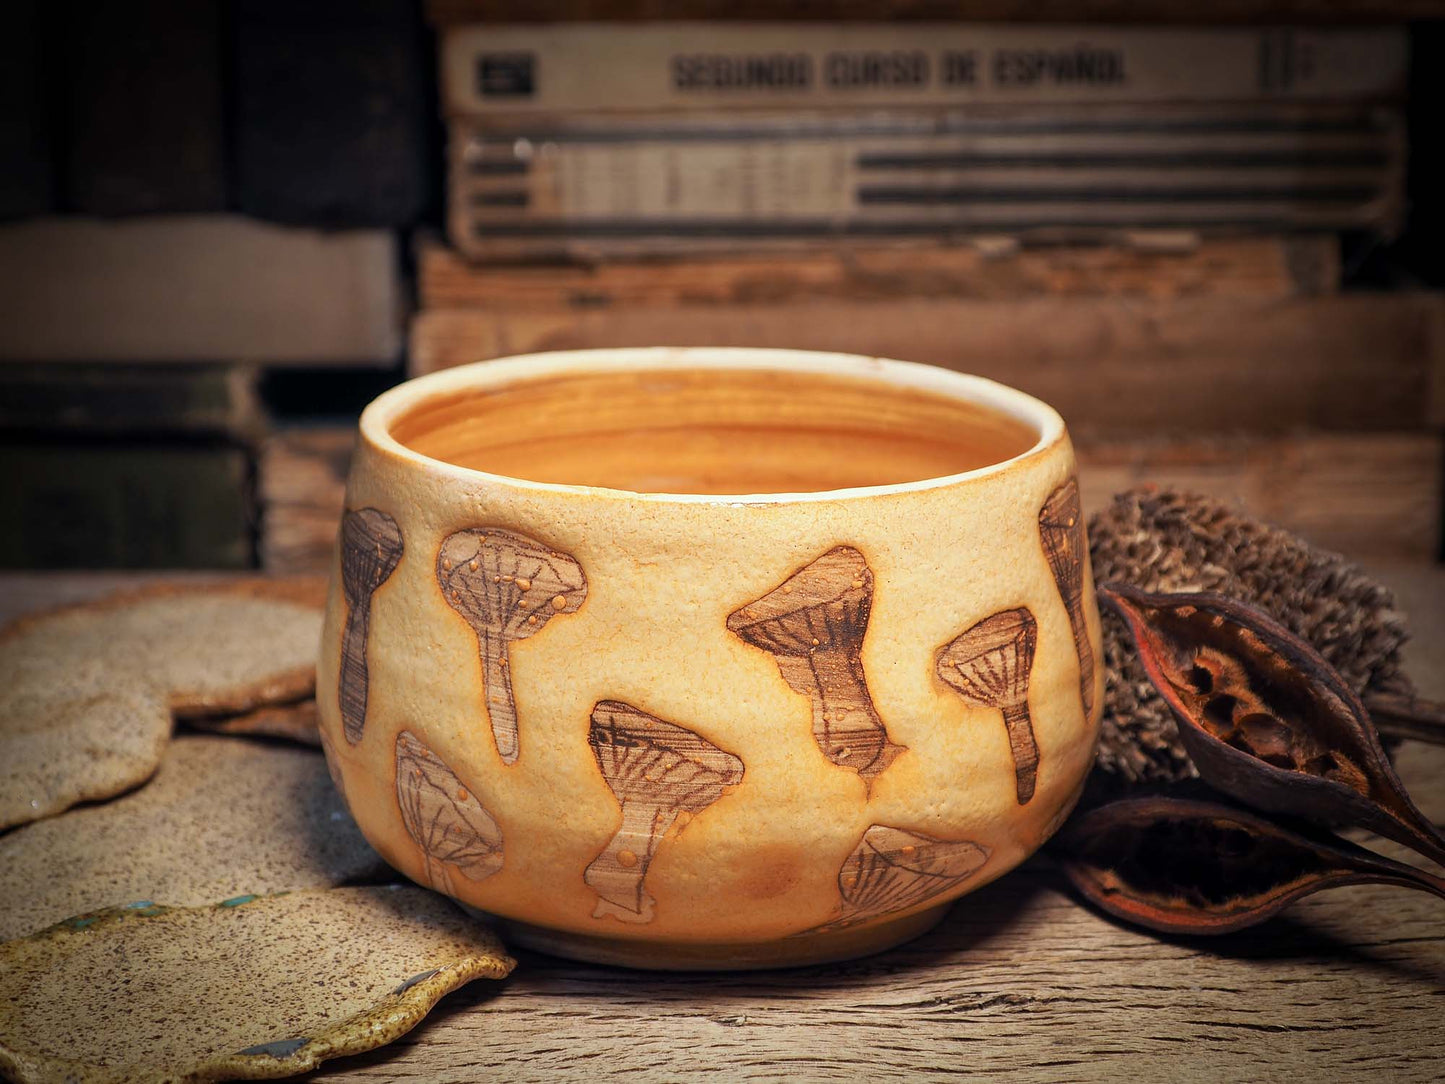 This handmade ceramic jar with lid was created by me, Idania Salcido, the artist behind Danita Art on my studio with lots of love. It features sgraffito mushrooms with beautiful warm color glaze and mushrooms on the lid. It will be perfect to keep everything you love safe and away from prying eyes.